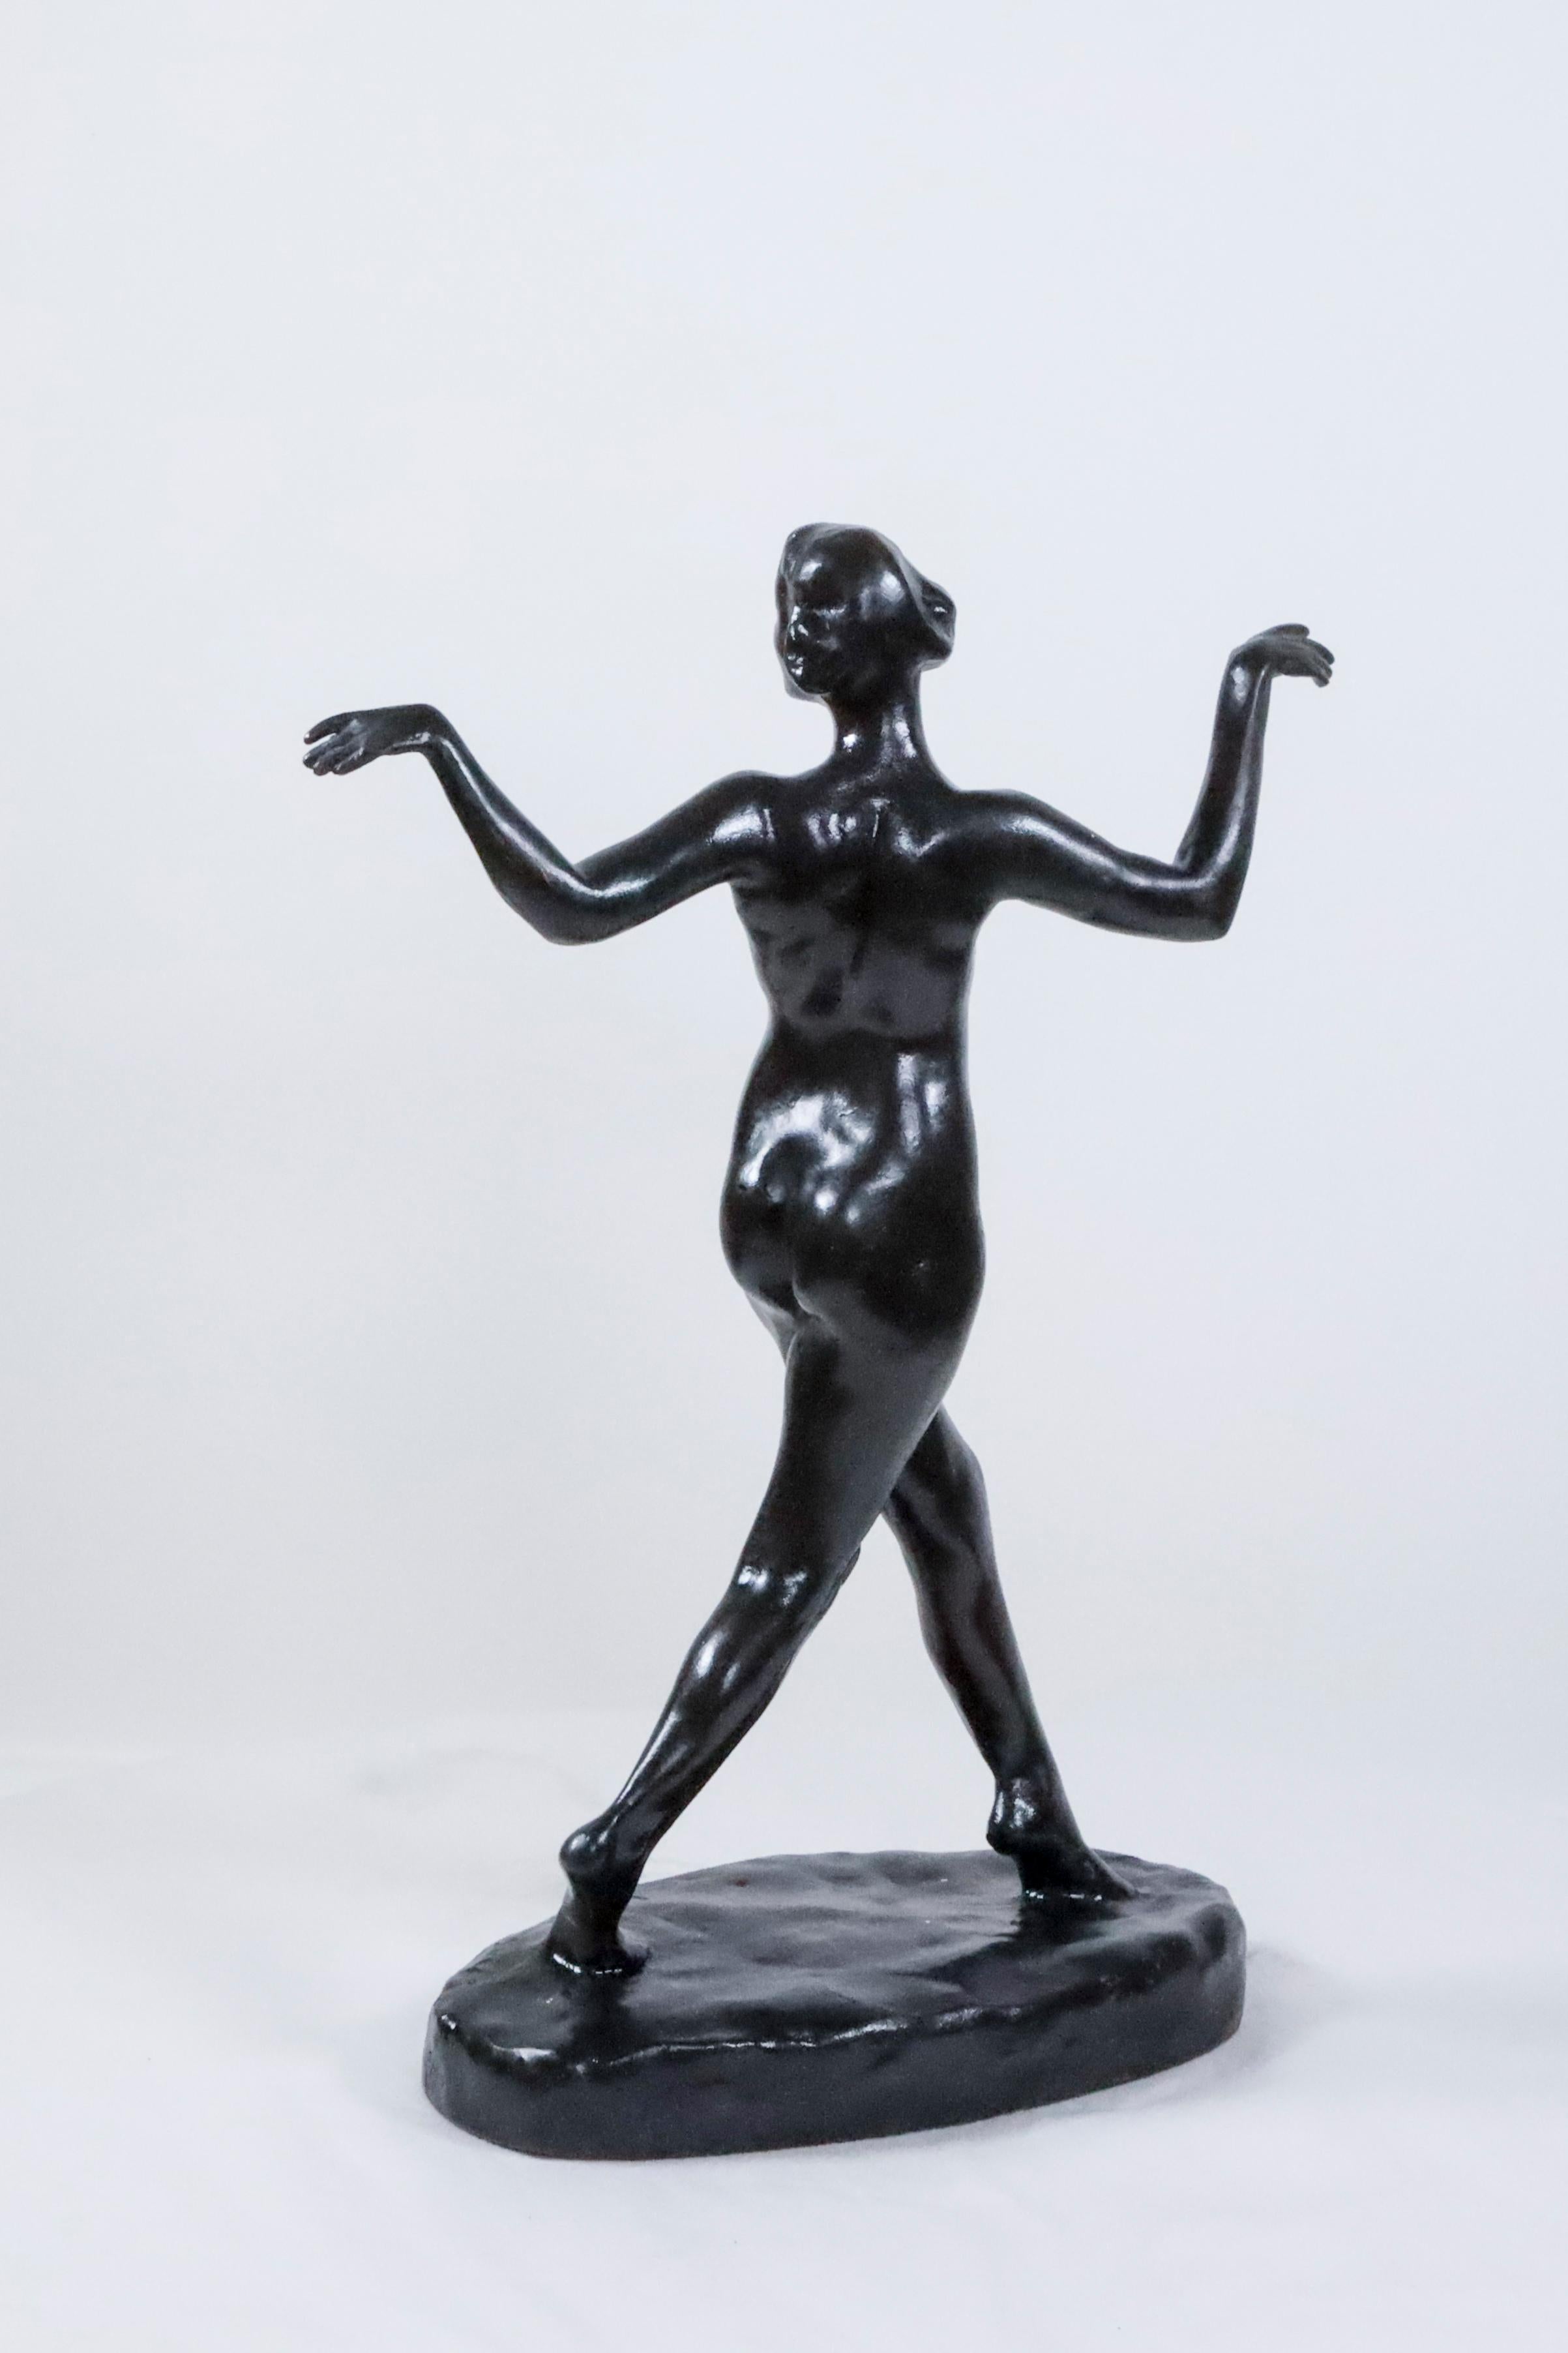 Dancing Nude Bronze by Charles Rumsey is one of many figures he depicted of women.  He has usually been known for his sculptures of horses, polo players, wildlife and dogs, mainly due to the fact that he was an avid sportman, hunter, and renowned